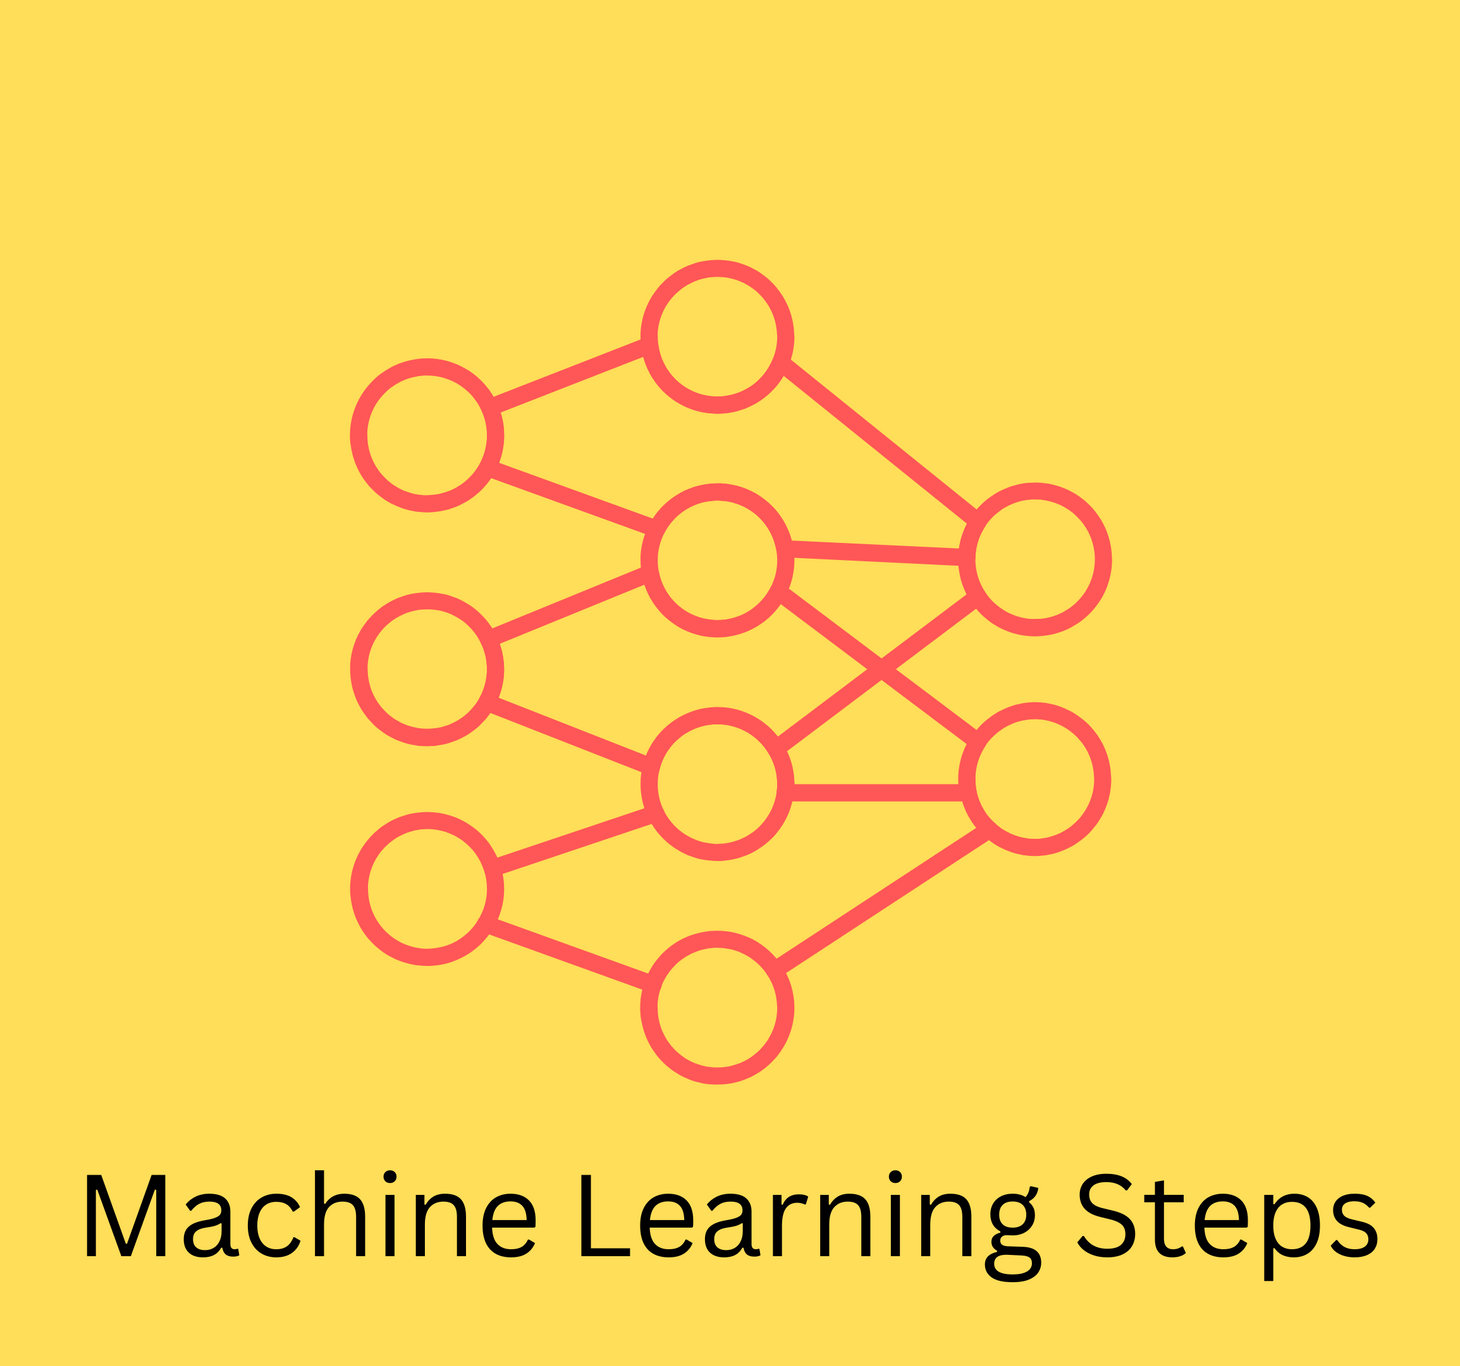 Steps in Machine Learning